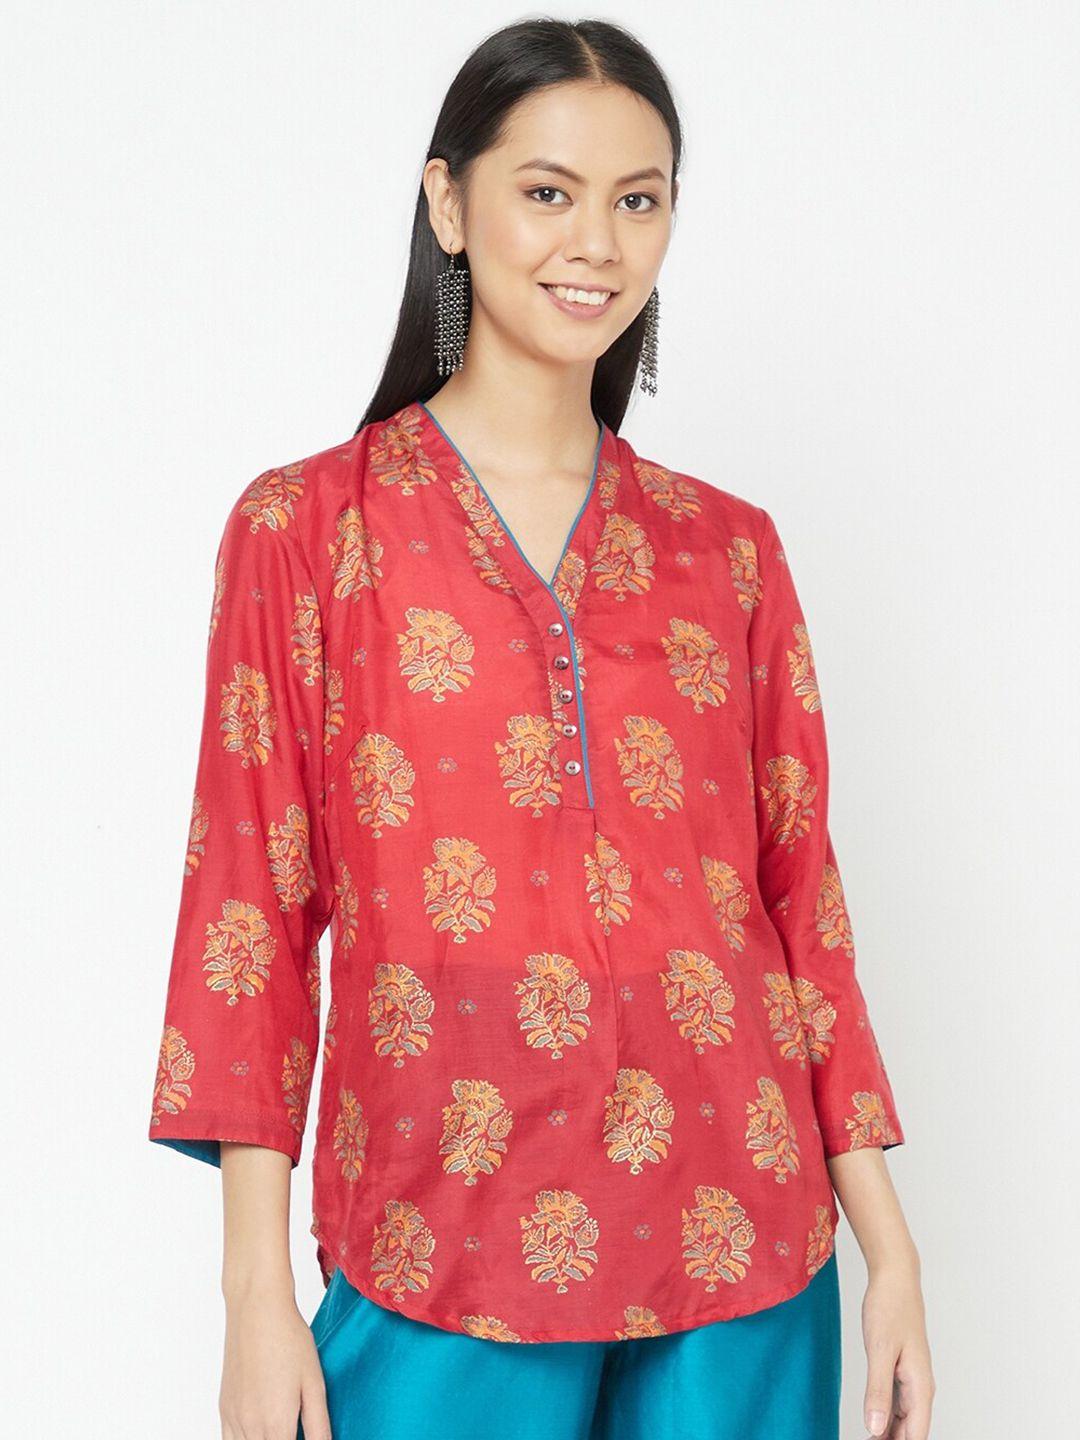 fabindia red & gold-toned ethnic motifs printed top